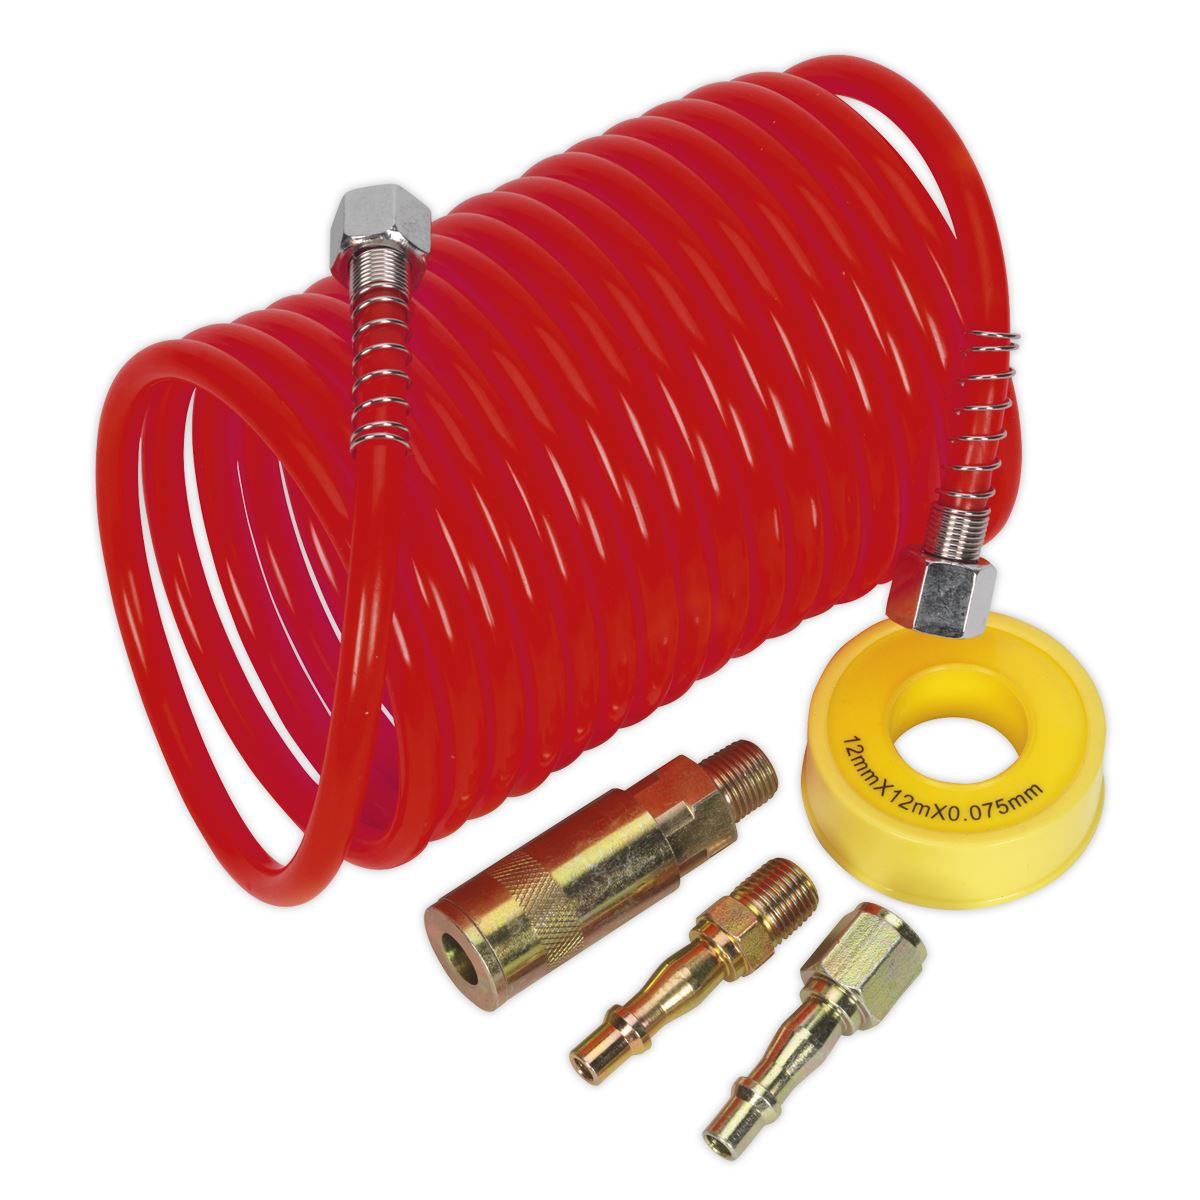 Sealey Air Hose Kit 5m x Ø5mm PE Coiled with Connectors